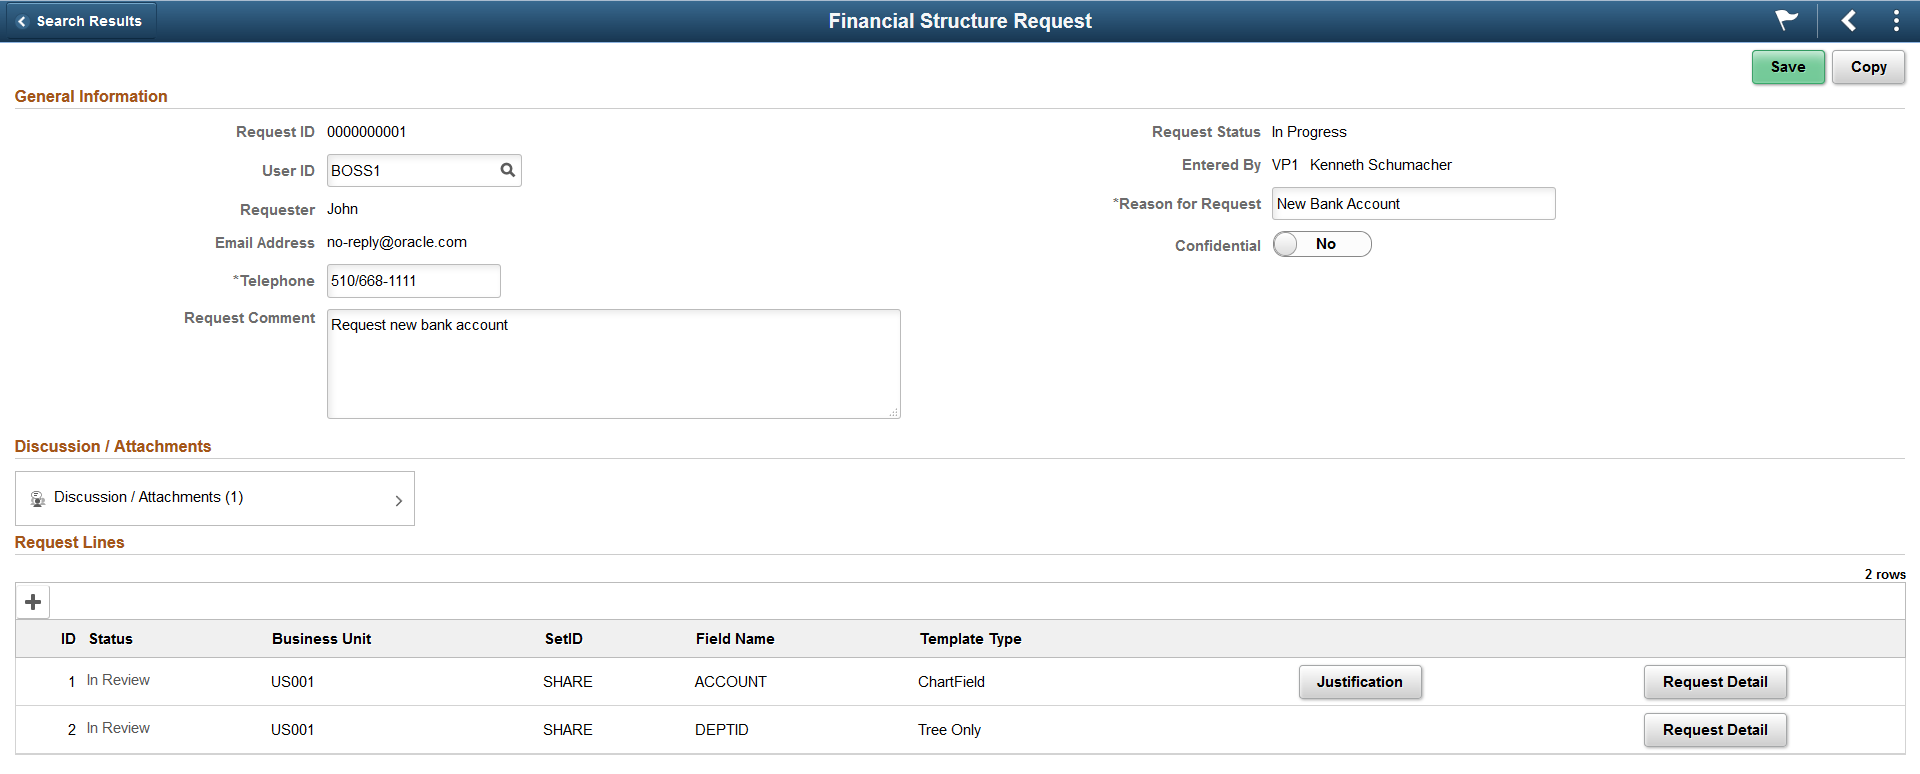 Financial Structure Request page